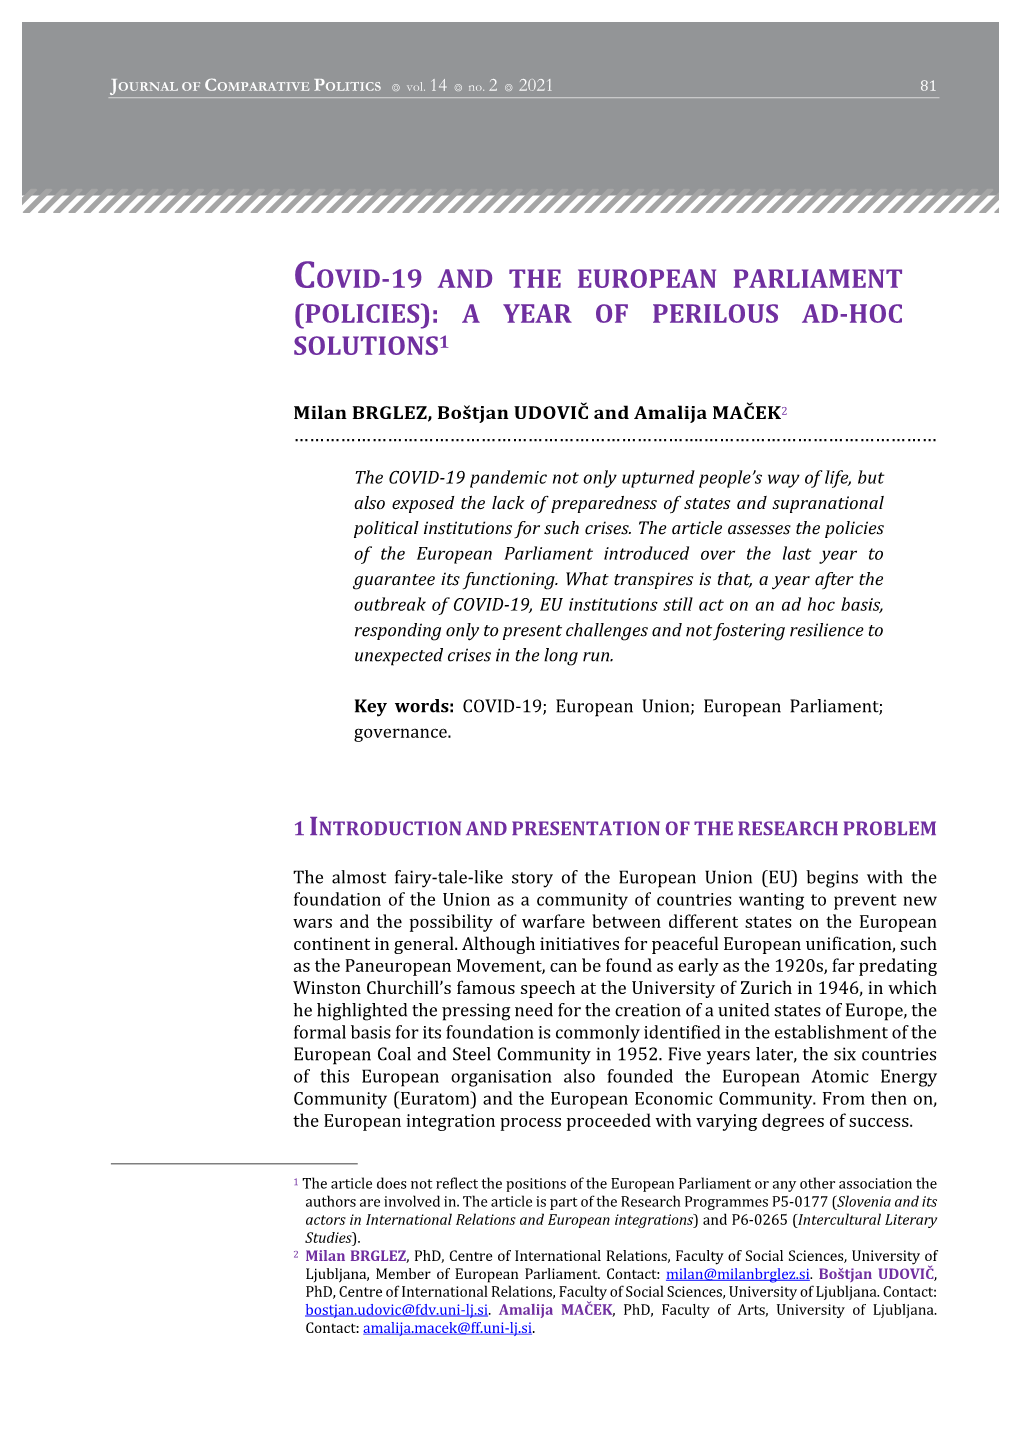 Covid-19 and the European Parliament (Policies): a Year of Perilous Ad-Hoc Solutions1